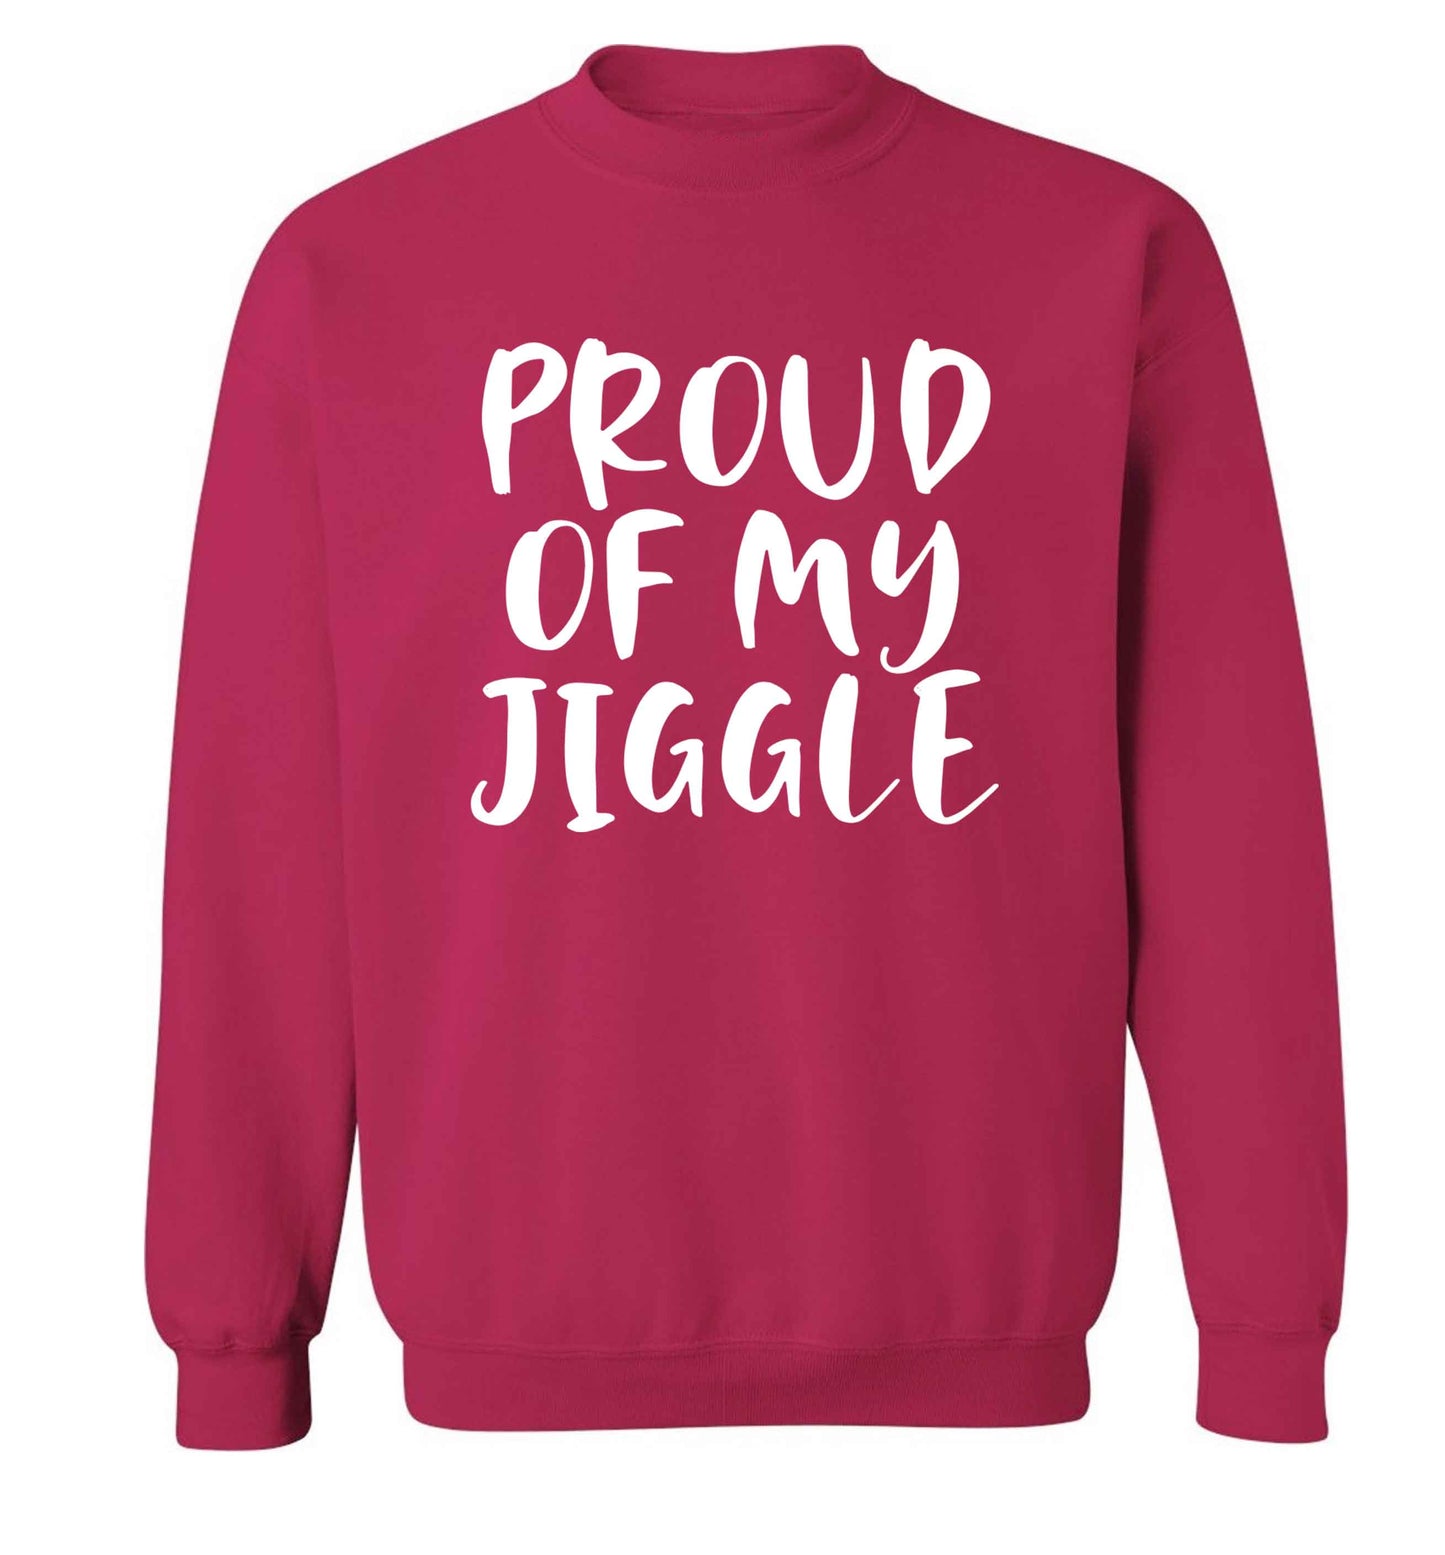 Proud of my jiggle adult's unisex pink sweater 2XL